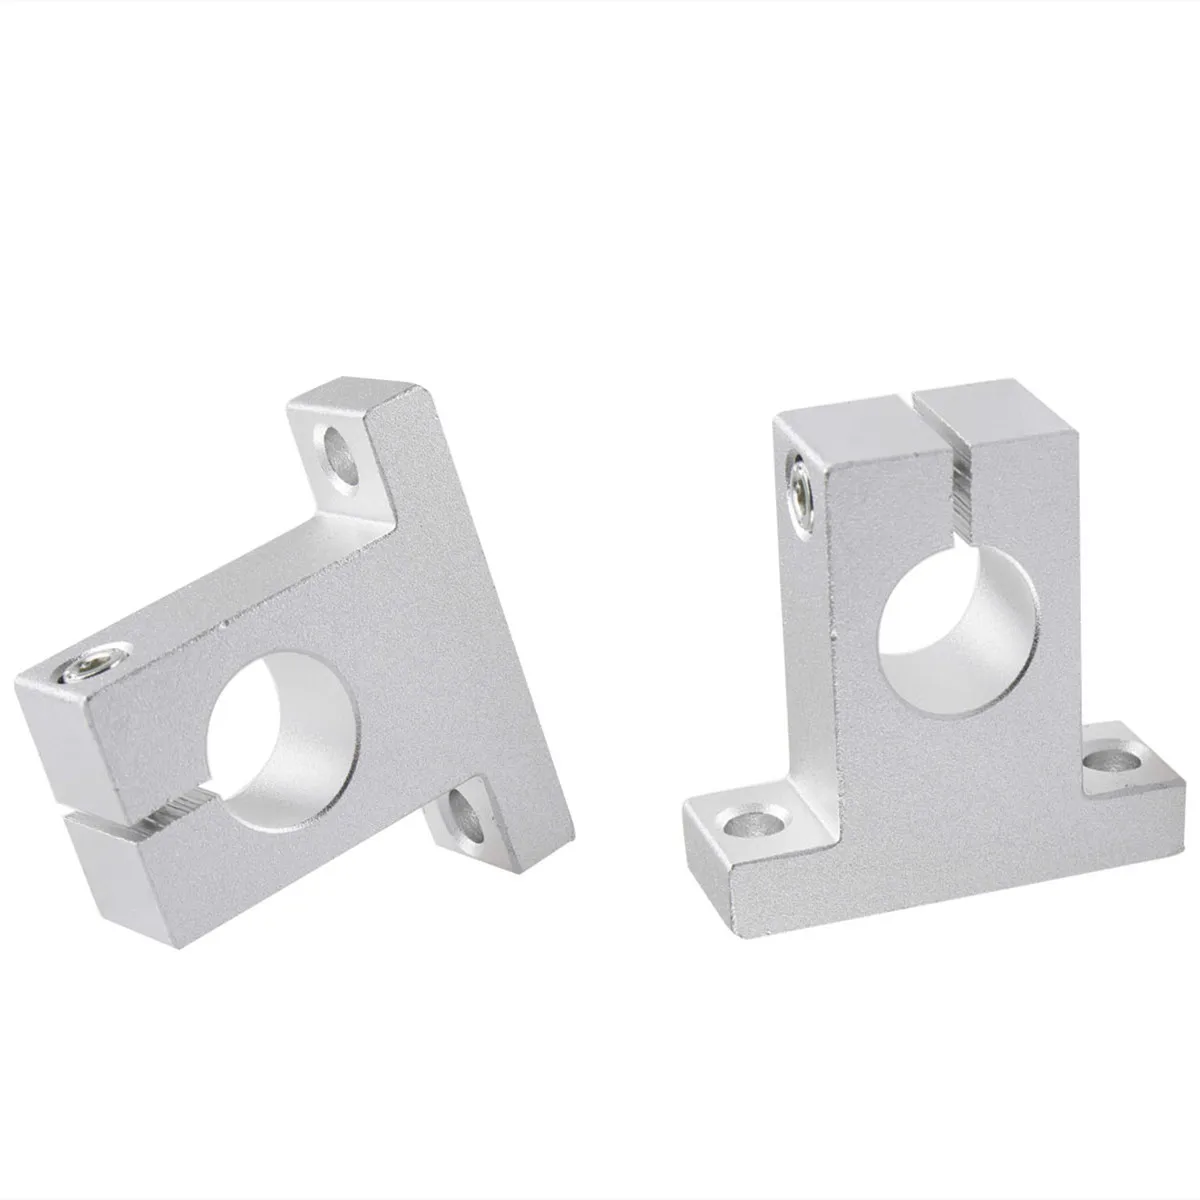 1/4pcs Bearing Support SK8 SK10 SK12 SK16 SK20 SK25 Linear Rail Shaft Support For Axis XYZ Table CNC Router Of 3D Printer Parts